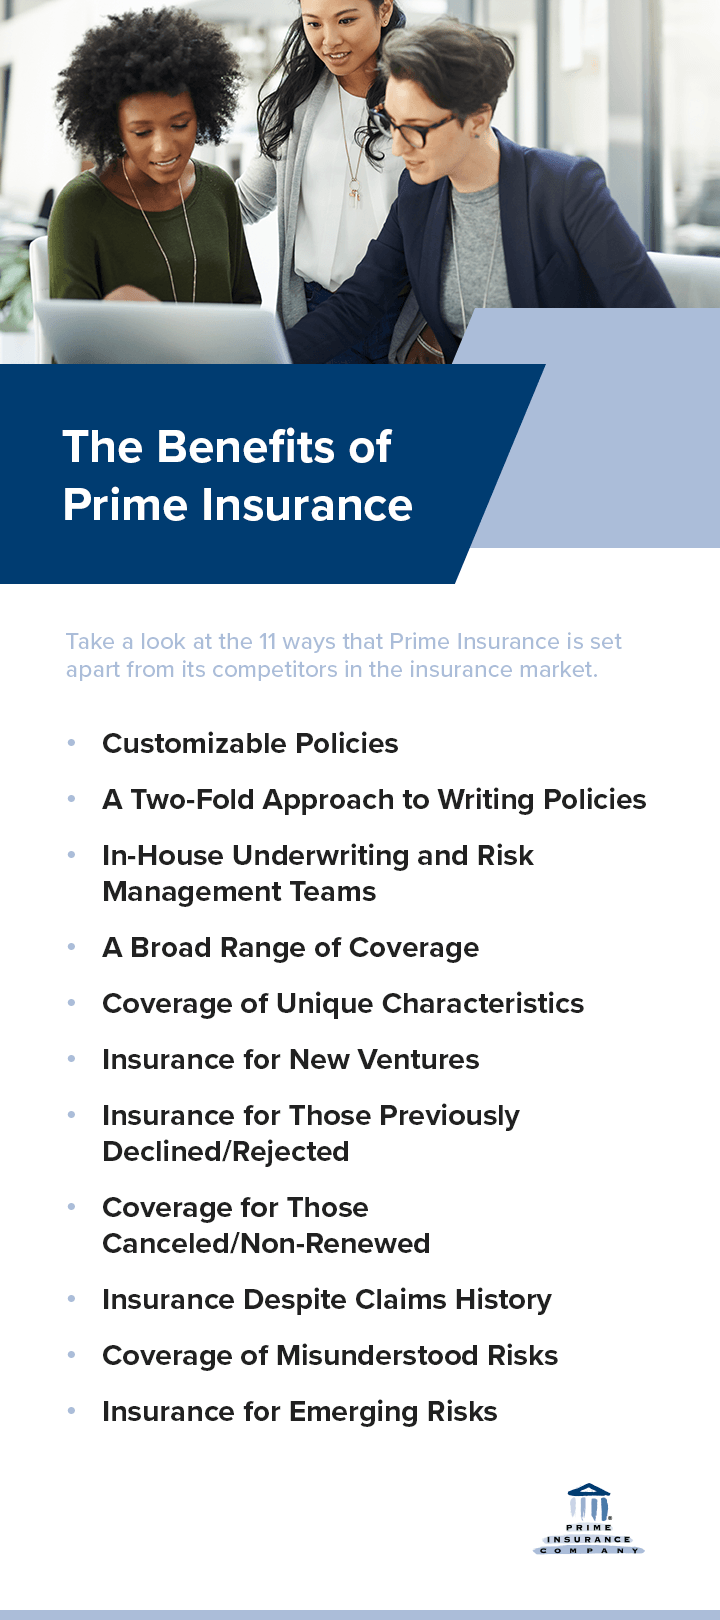 The Benefits of Prime Insurance Company 